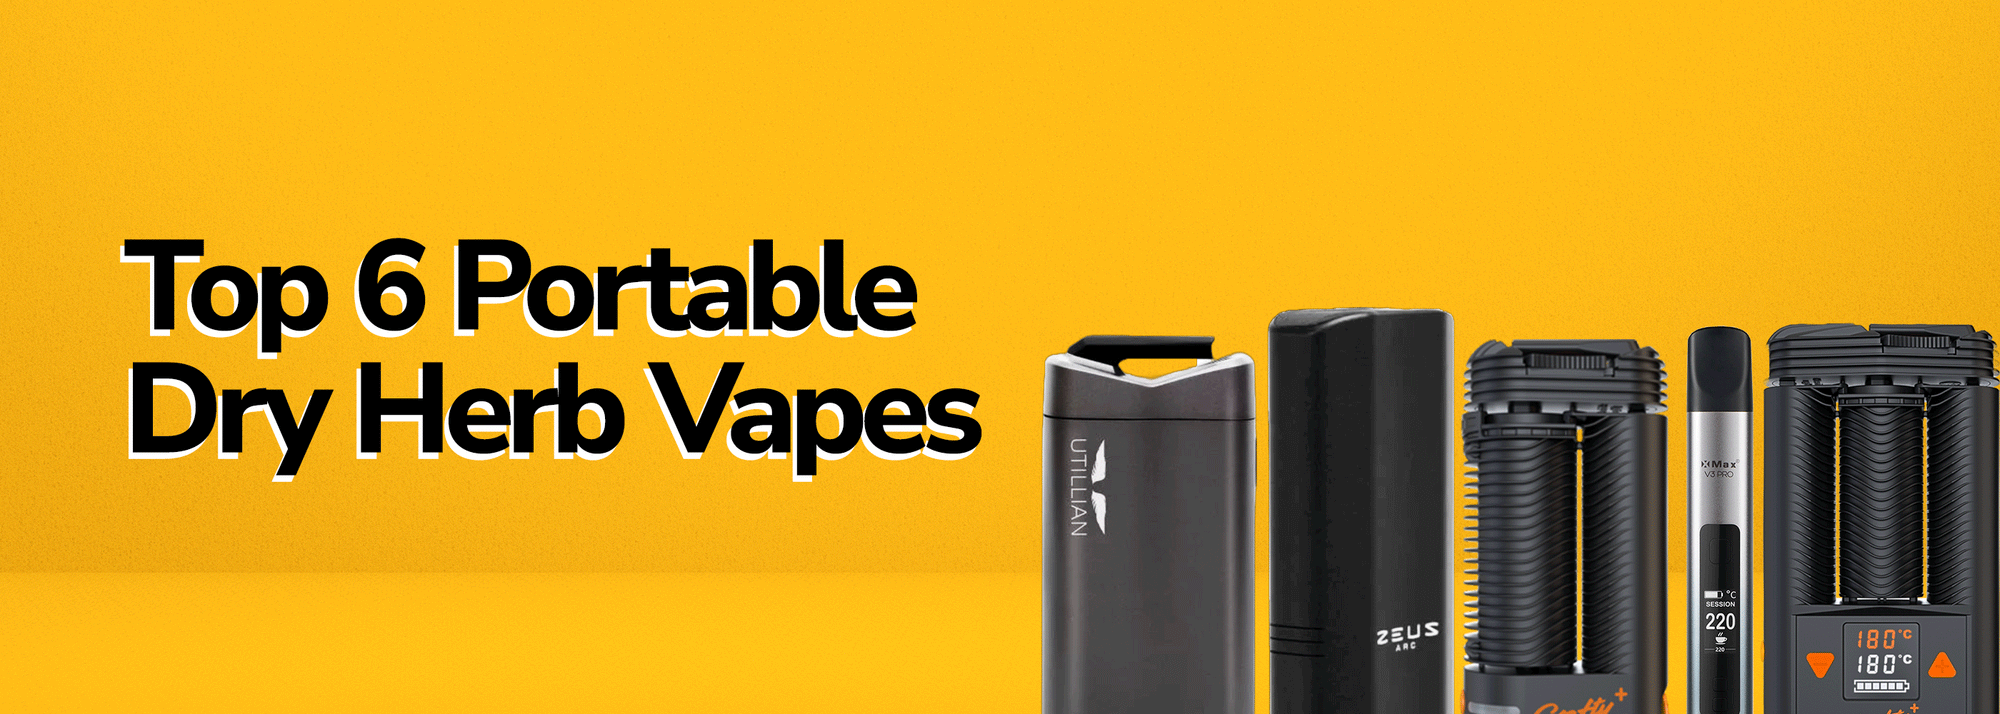 Best Portable Dry Herb Vaporizers 2022 - Wick and Wire Co Melbourne Vape Shop, Victoria Australia